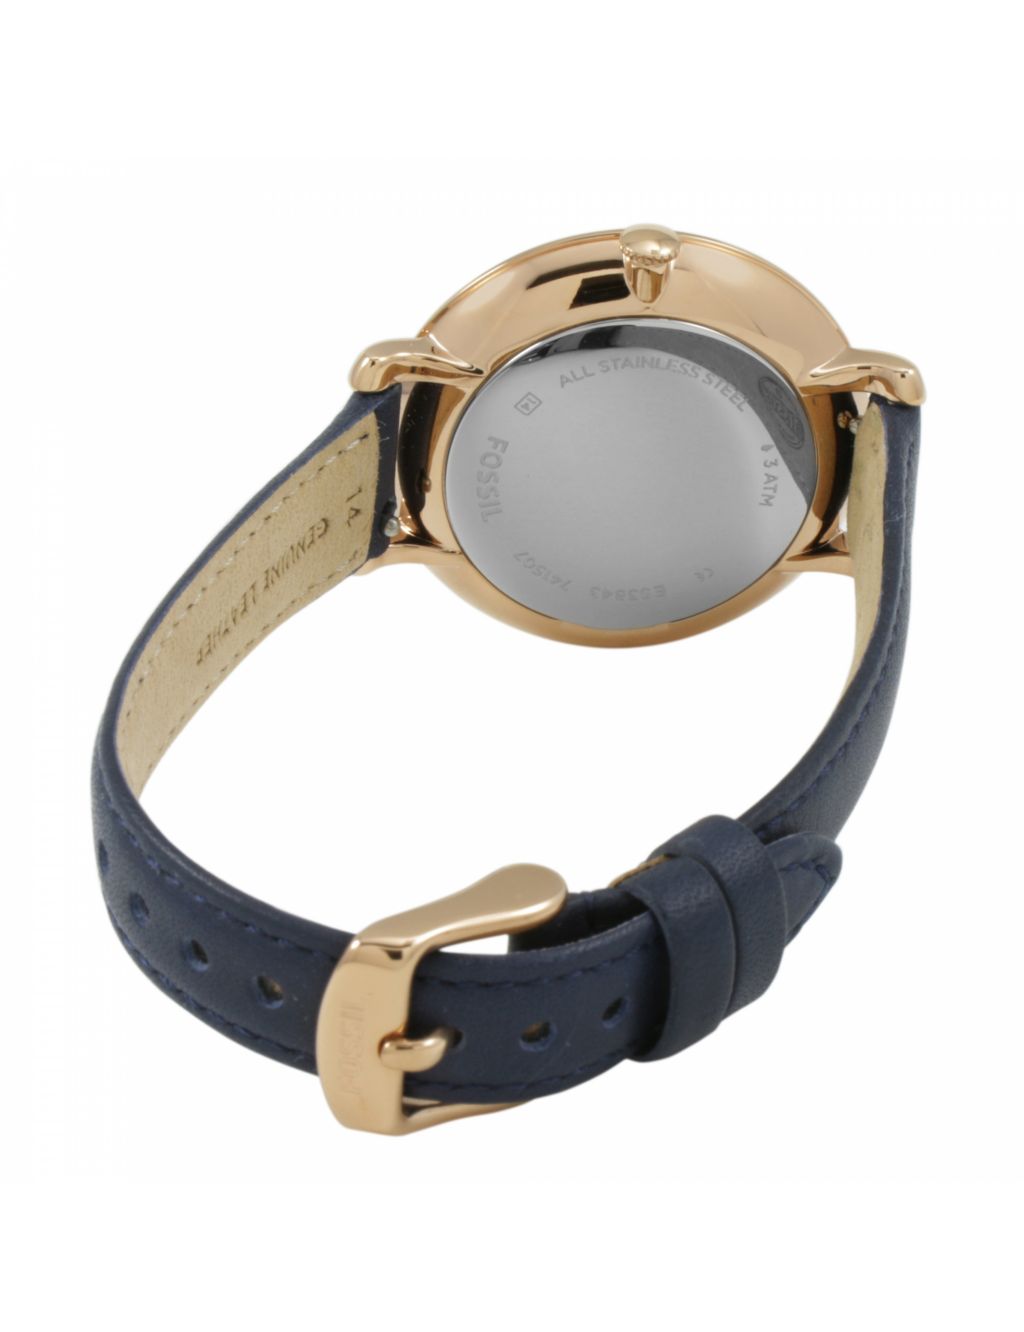 Fossil Jacqueline Navy Leather Watch image 2